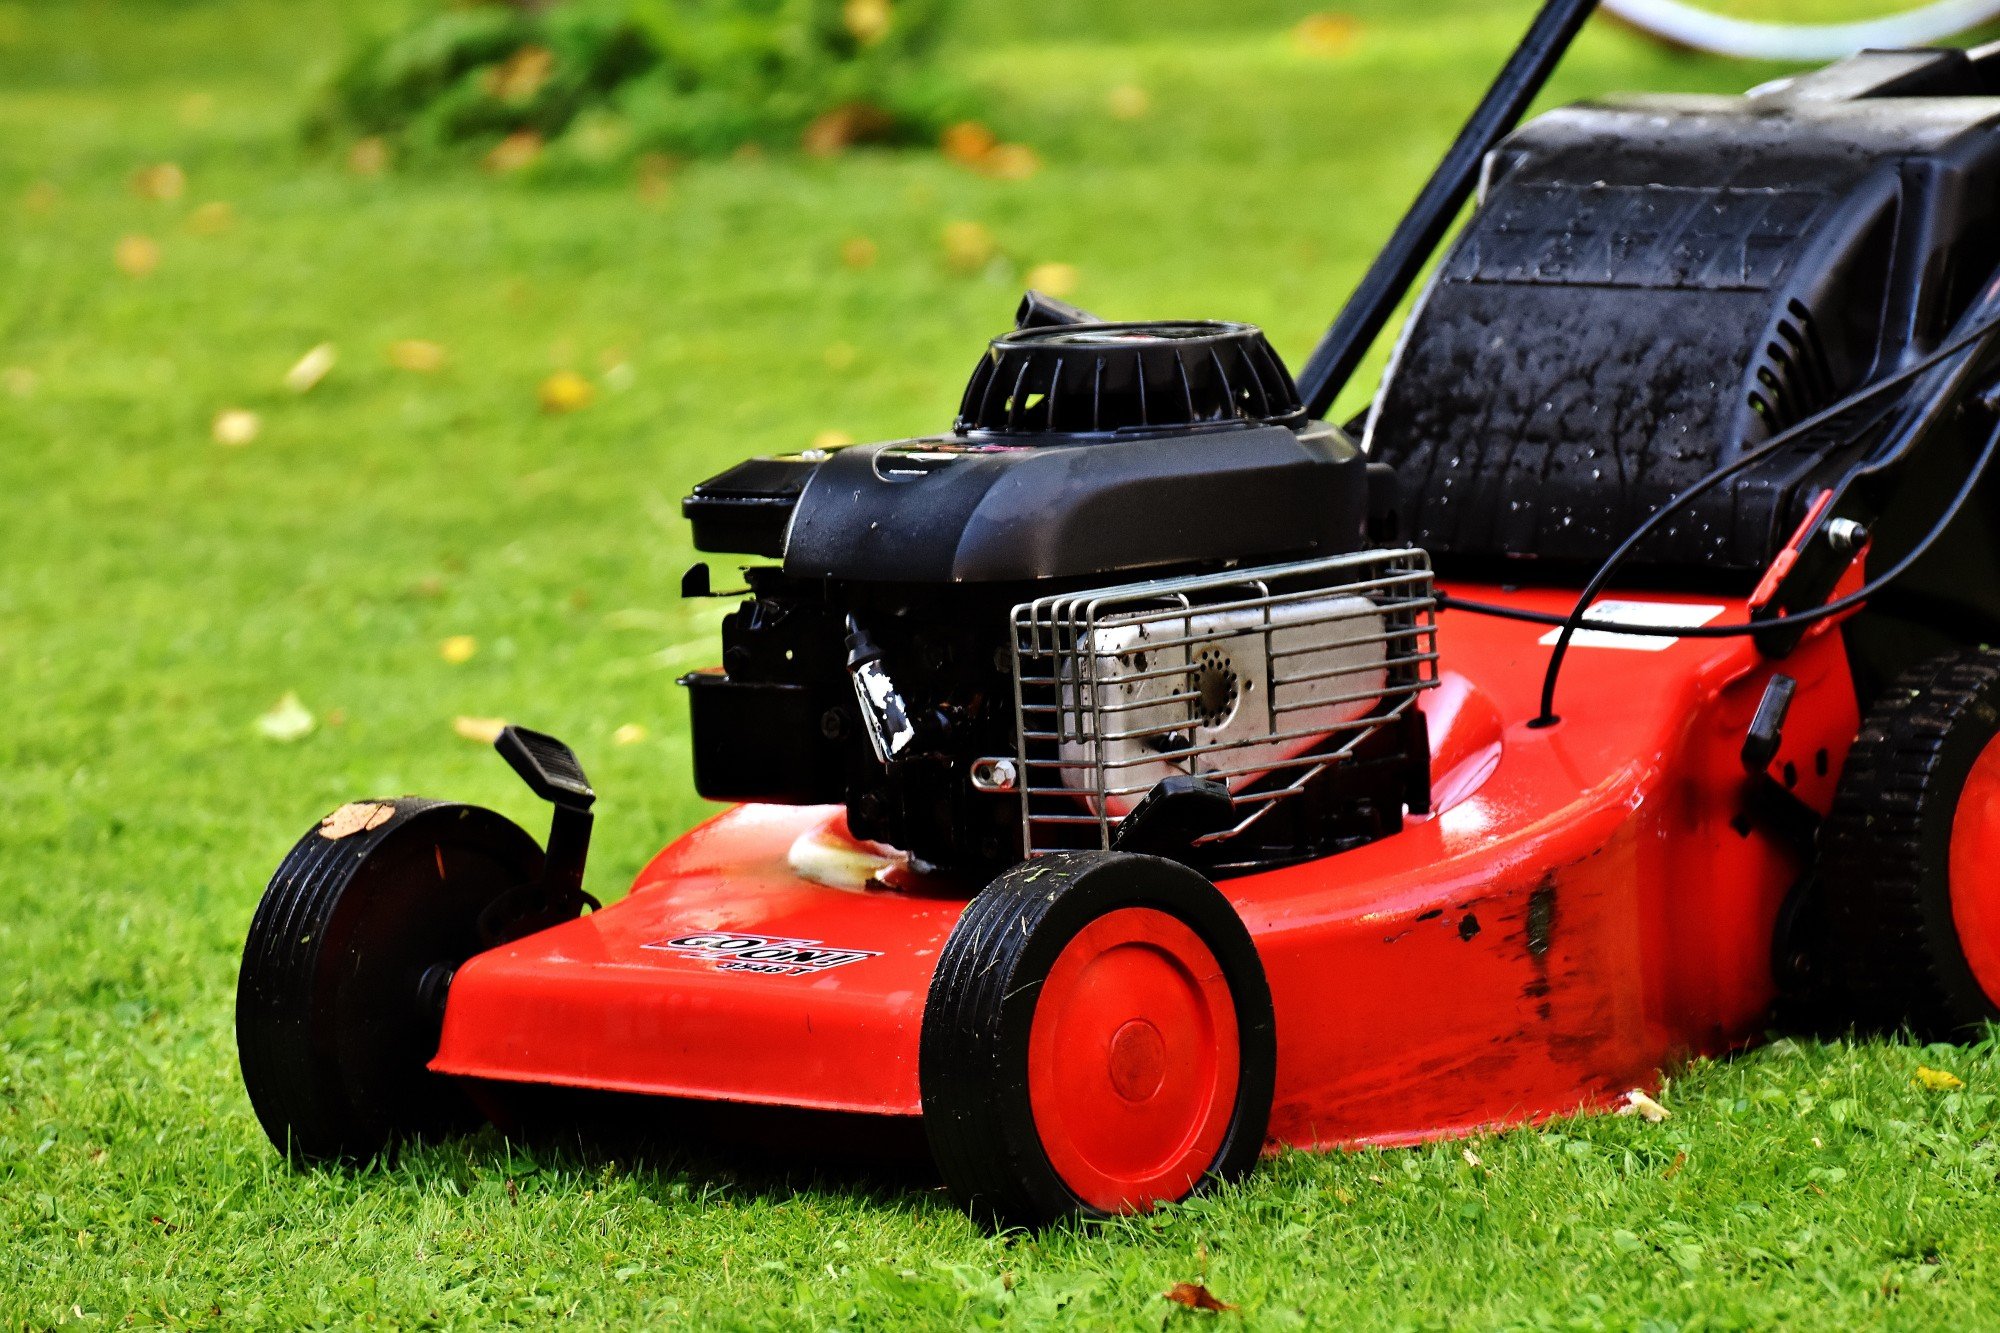 Each season brings with it new weather - and new grass height requirements. Are you cutting grass too short? Find out the best height for a healthy lawn!